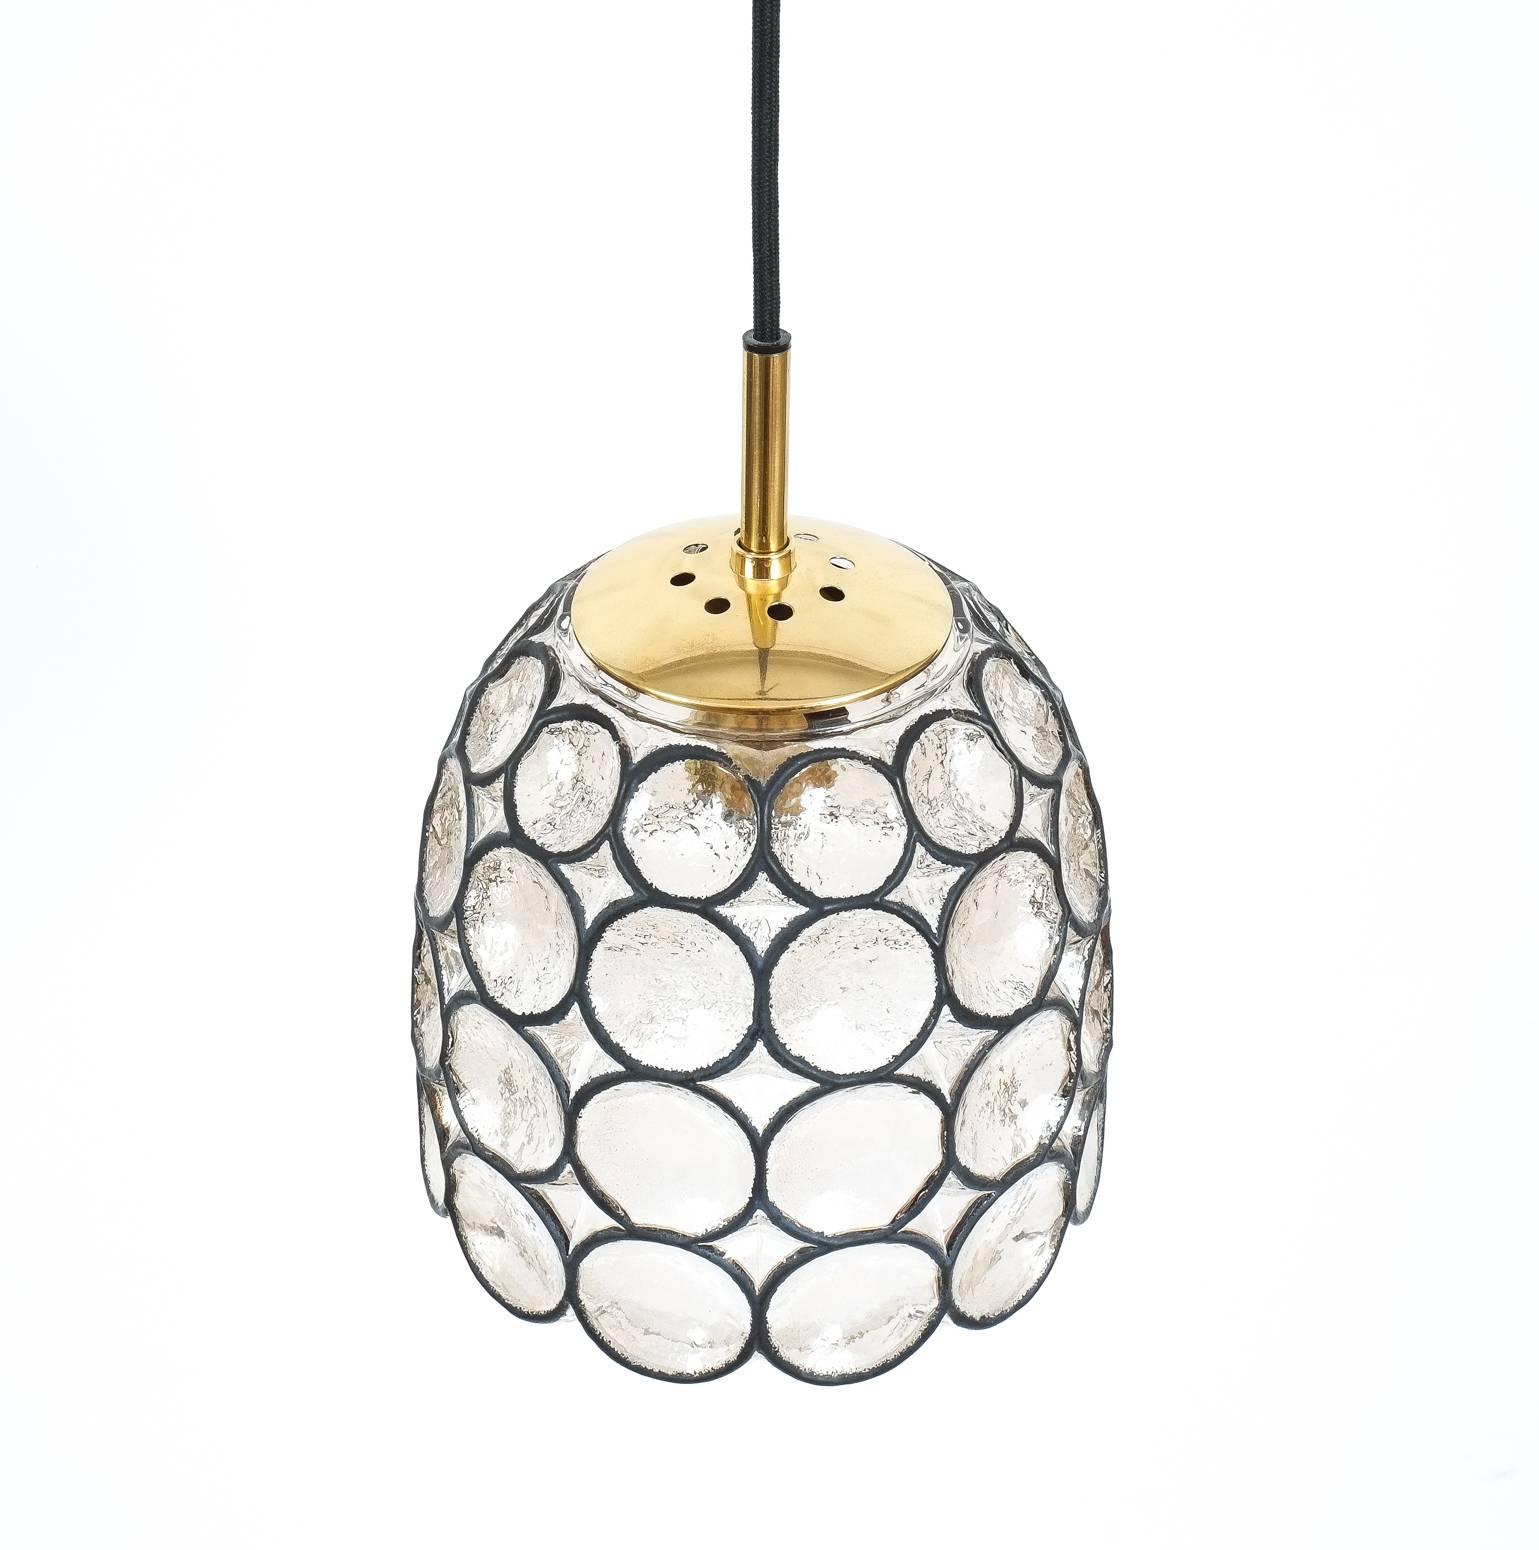 Beautiful set of three 'iron' and glass bell-shaped pendants by Limburg, Germany. These fixtures feature a concaved thick clear glass shade with circle 'iron' elements. The hardware is made from polished brass. It holds a single large bulb (100W